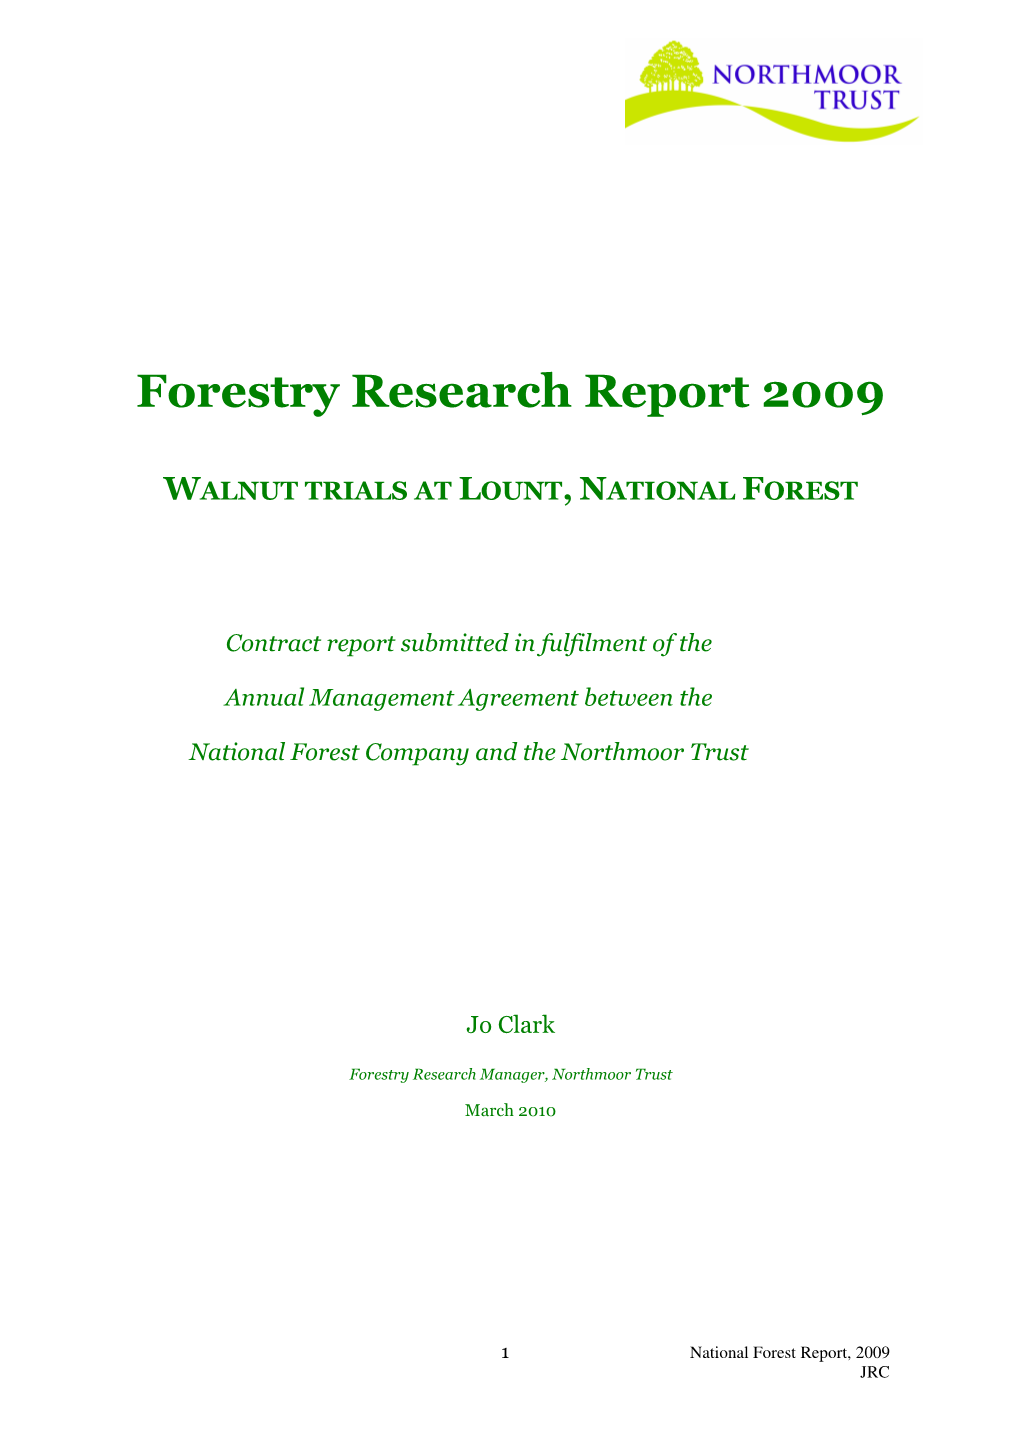 Forest Research Report 2009 Walnut Trials at Lount, National Forest